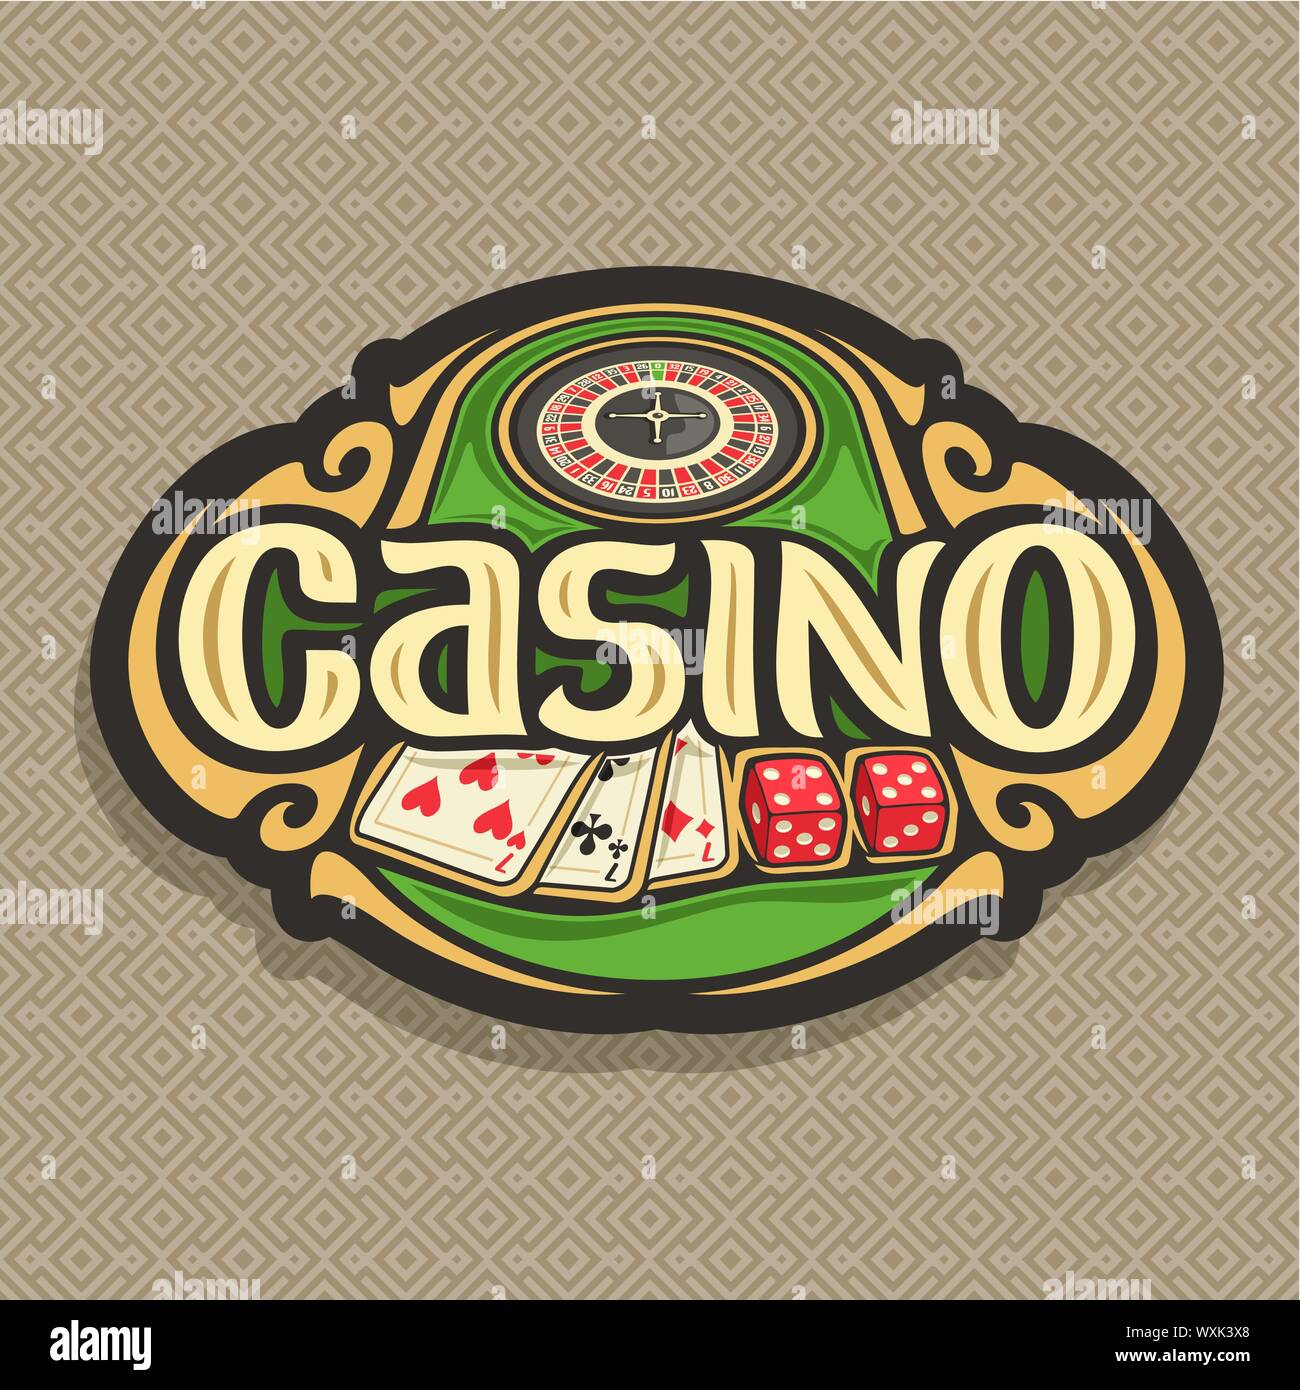 Vector logo for Casino club on brown background: roulette wheel on green table, lettering - casino, combination of playing cards 3 seven for blackjack Stock Vector